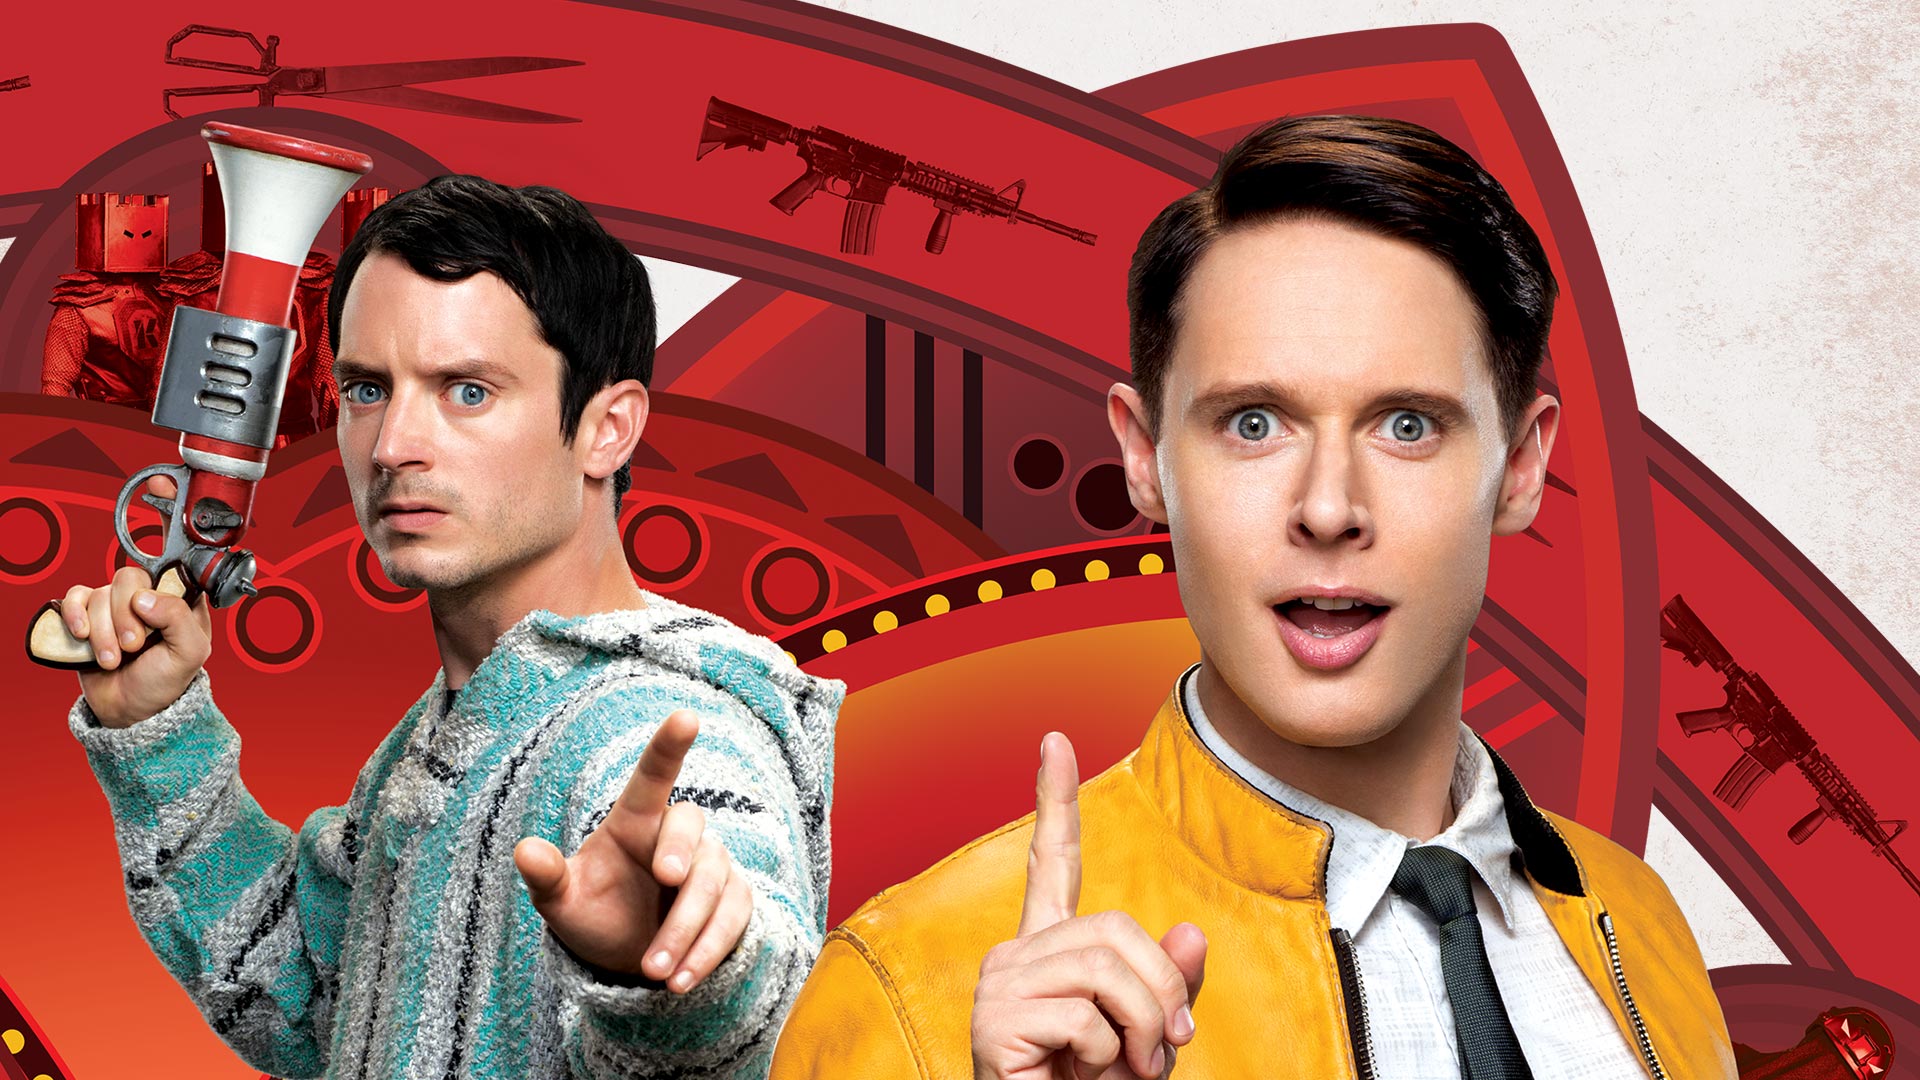 Watch Dirk Gently's Holistic Detective Agency Online | Stream Full Episodes